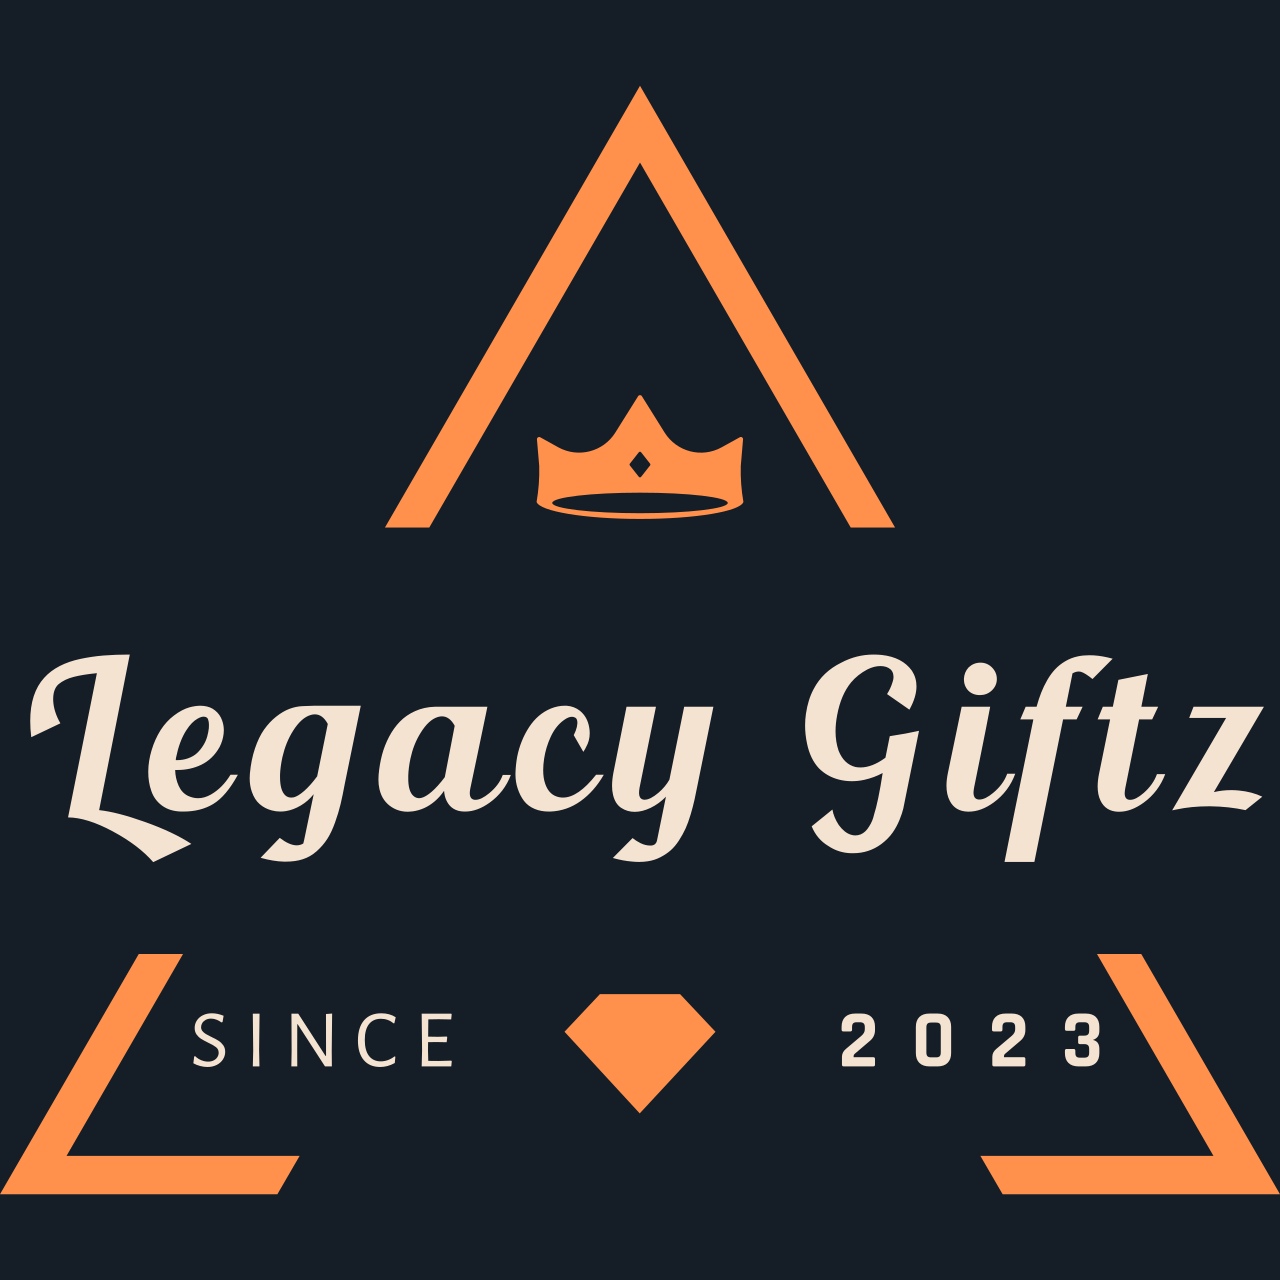 Legacy Giftz's web page